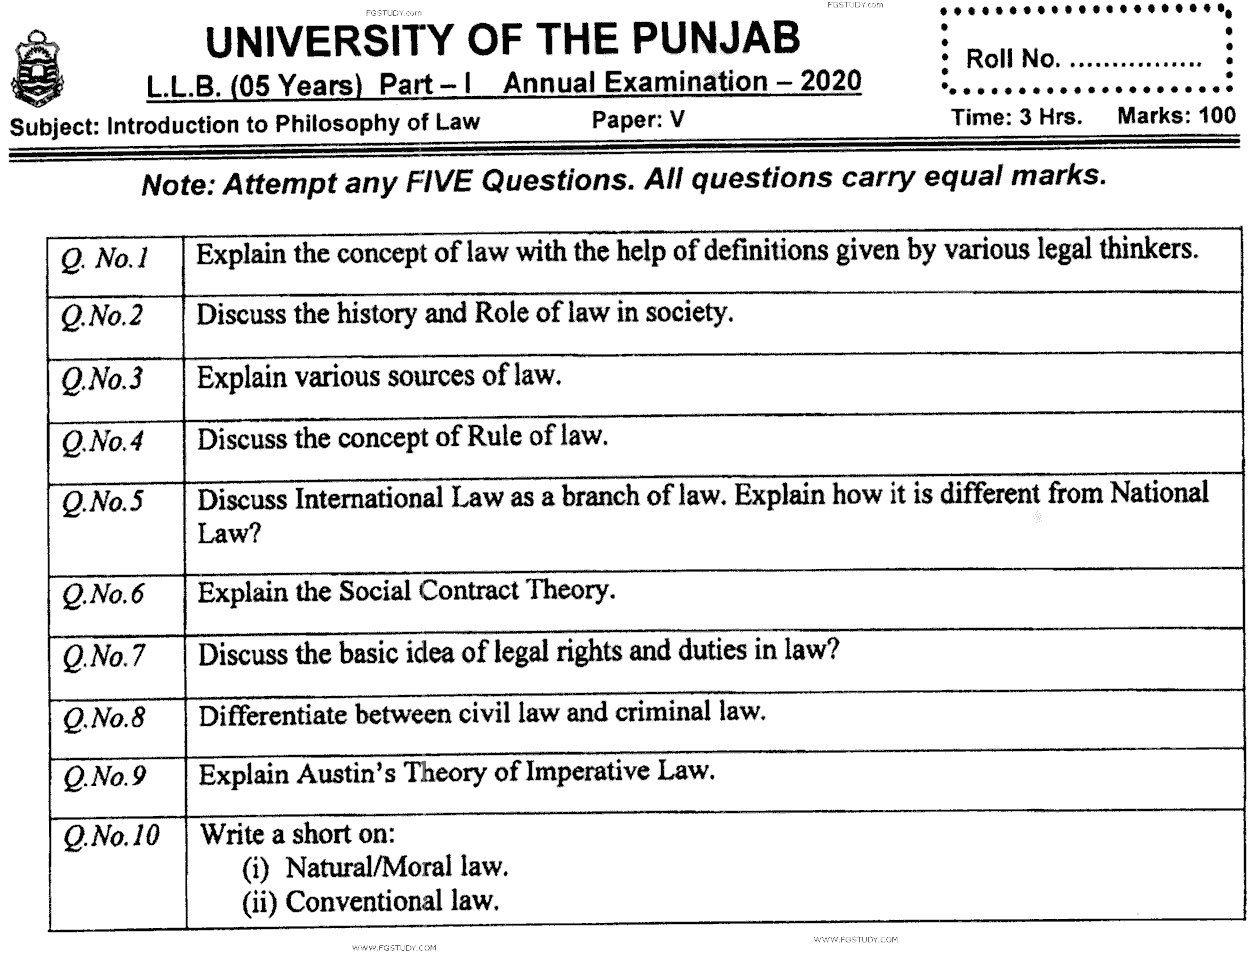 LLB Part 1 Introduction To Philosophy Of Law Past Paper 2020 Punjab University